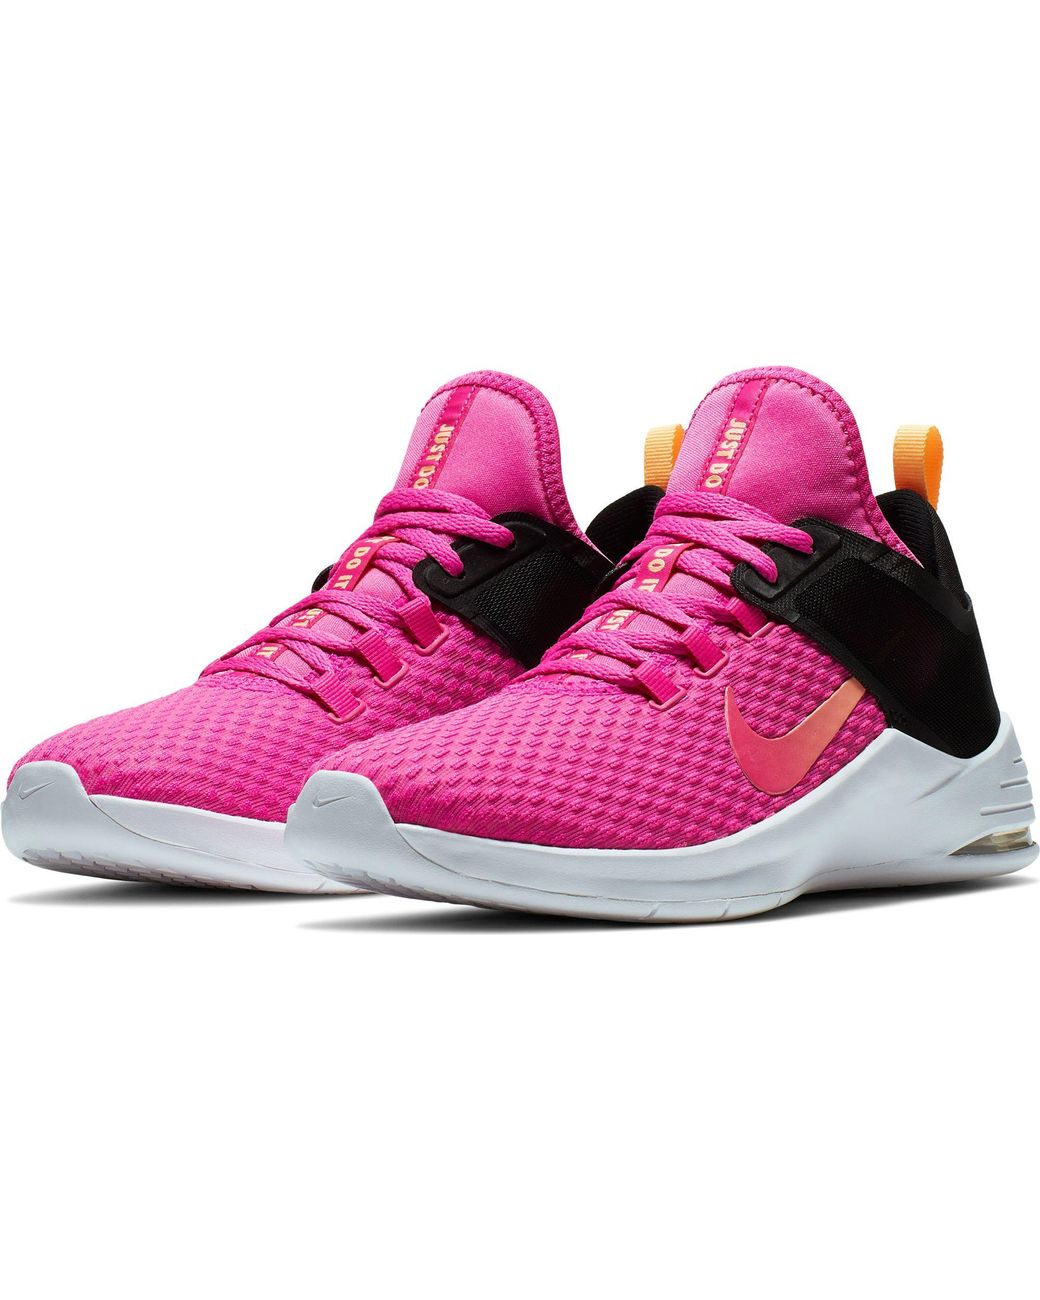 Nike Air Max Bella Tr 2 Training Shoe in Pink/Black/White (Pink) | Lyst